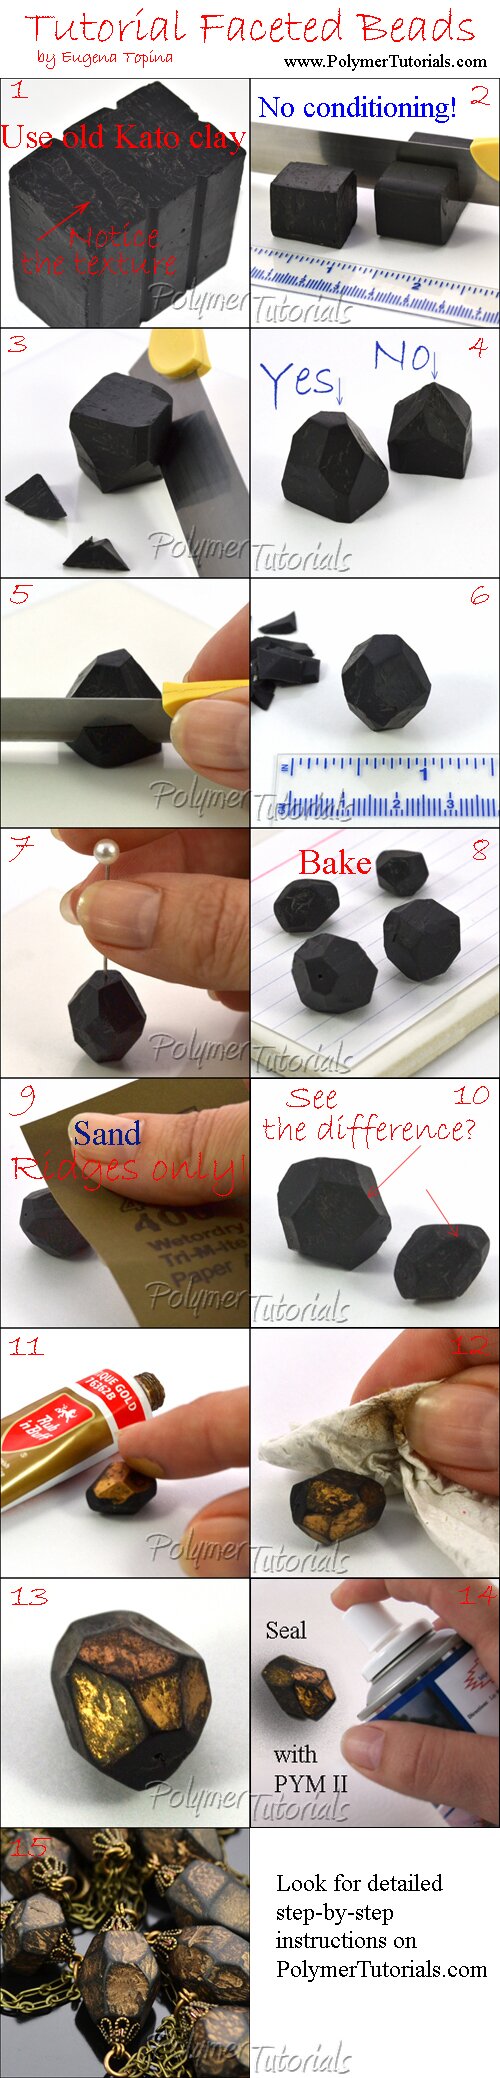 Image for Free Polymer Clay Tutorial Faceted Beads